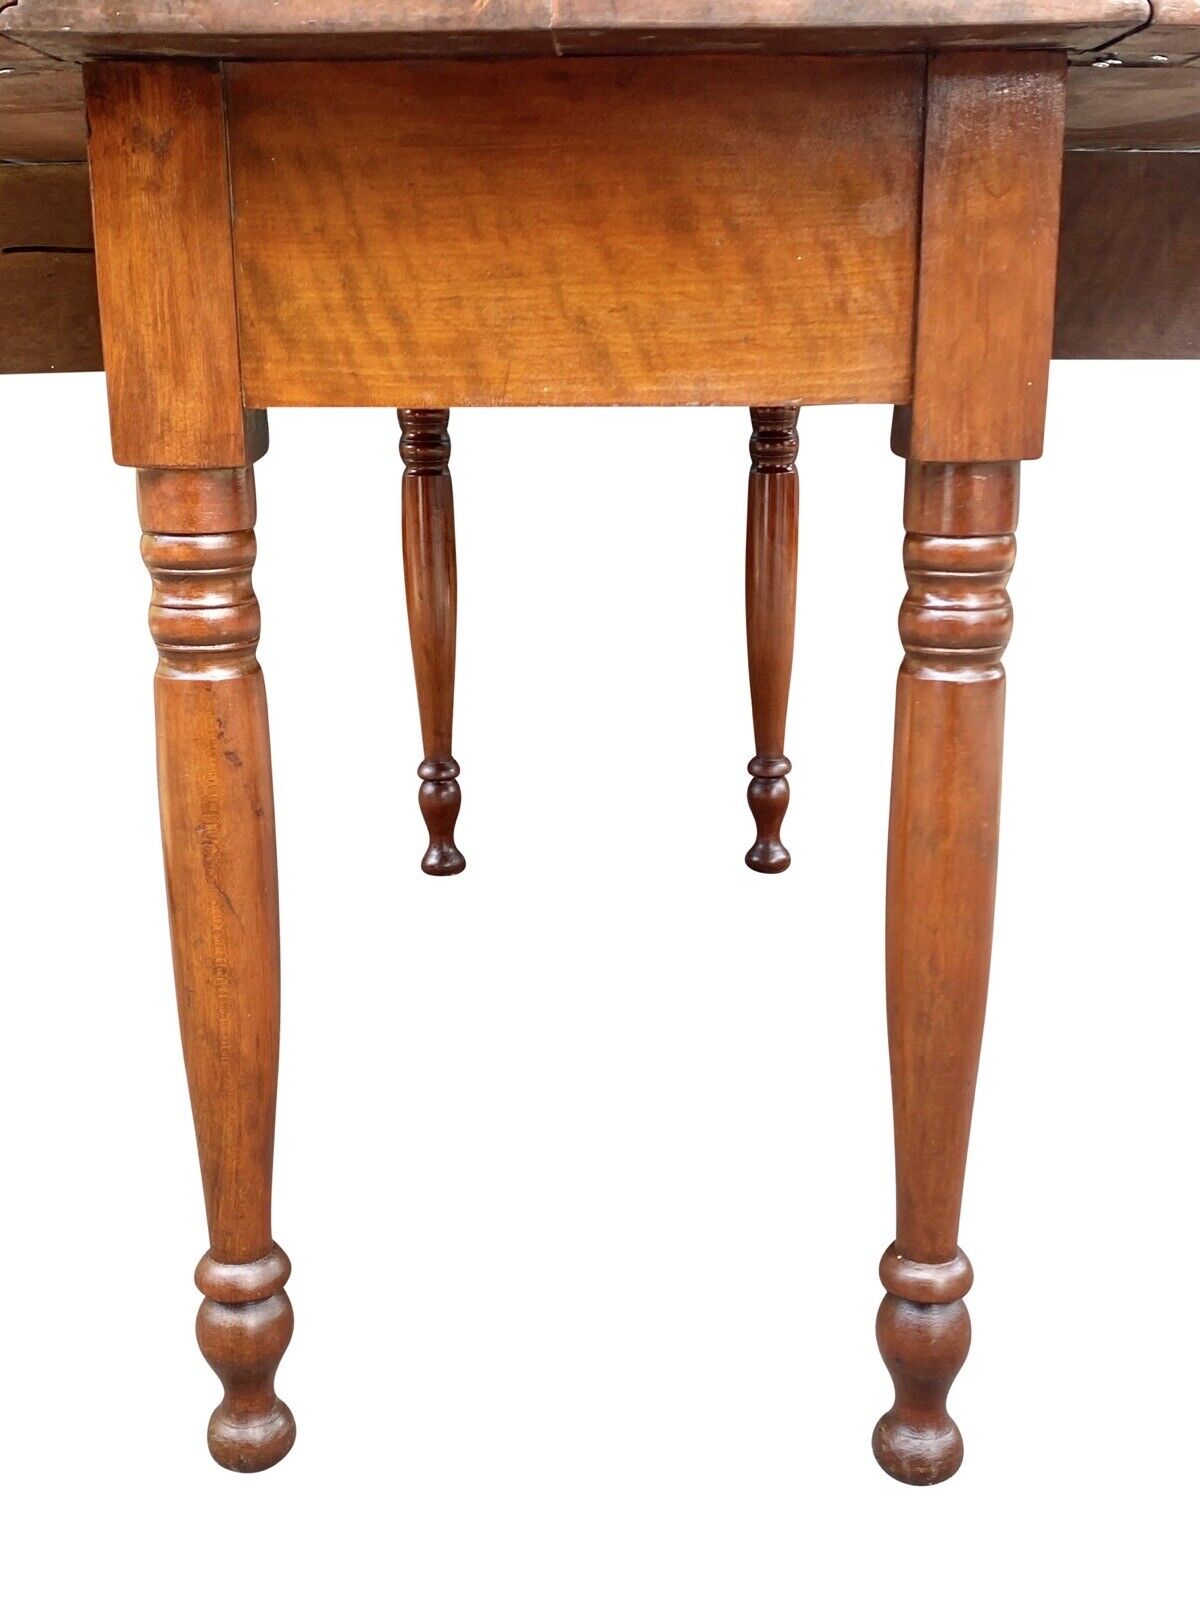 19th C Antique Sheraton Figured Cherry Drop Leaf Dining Table - 52" Long